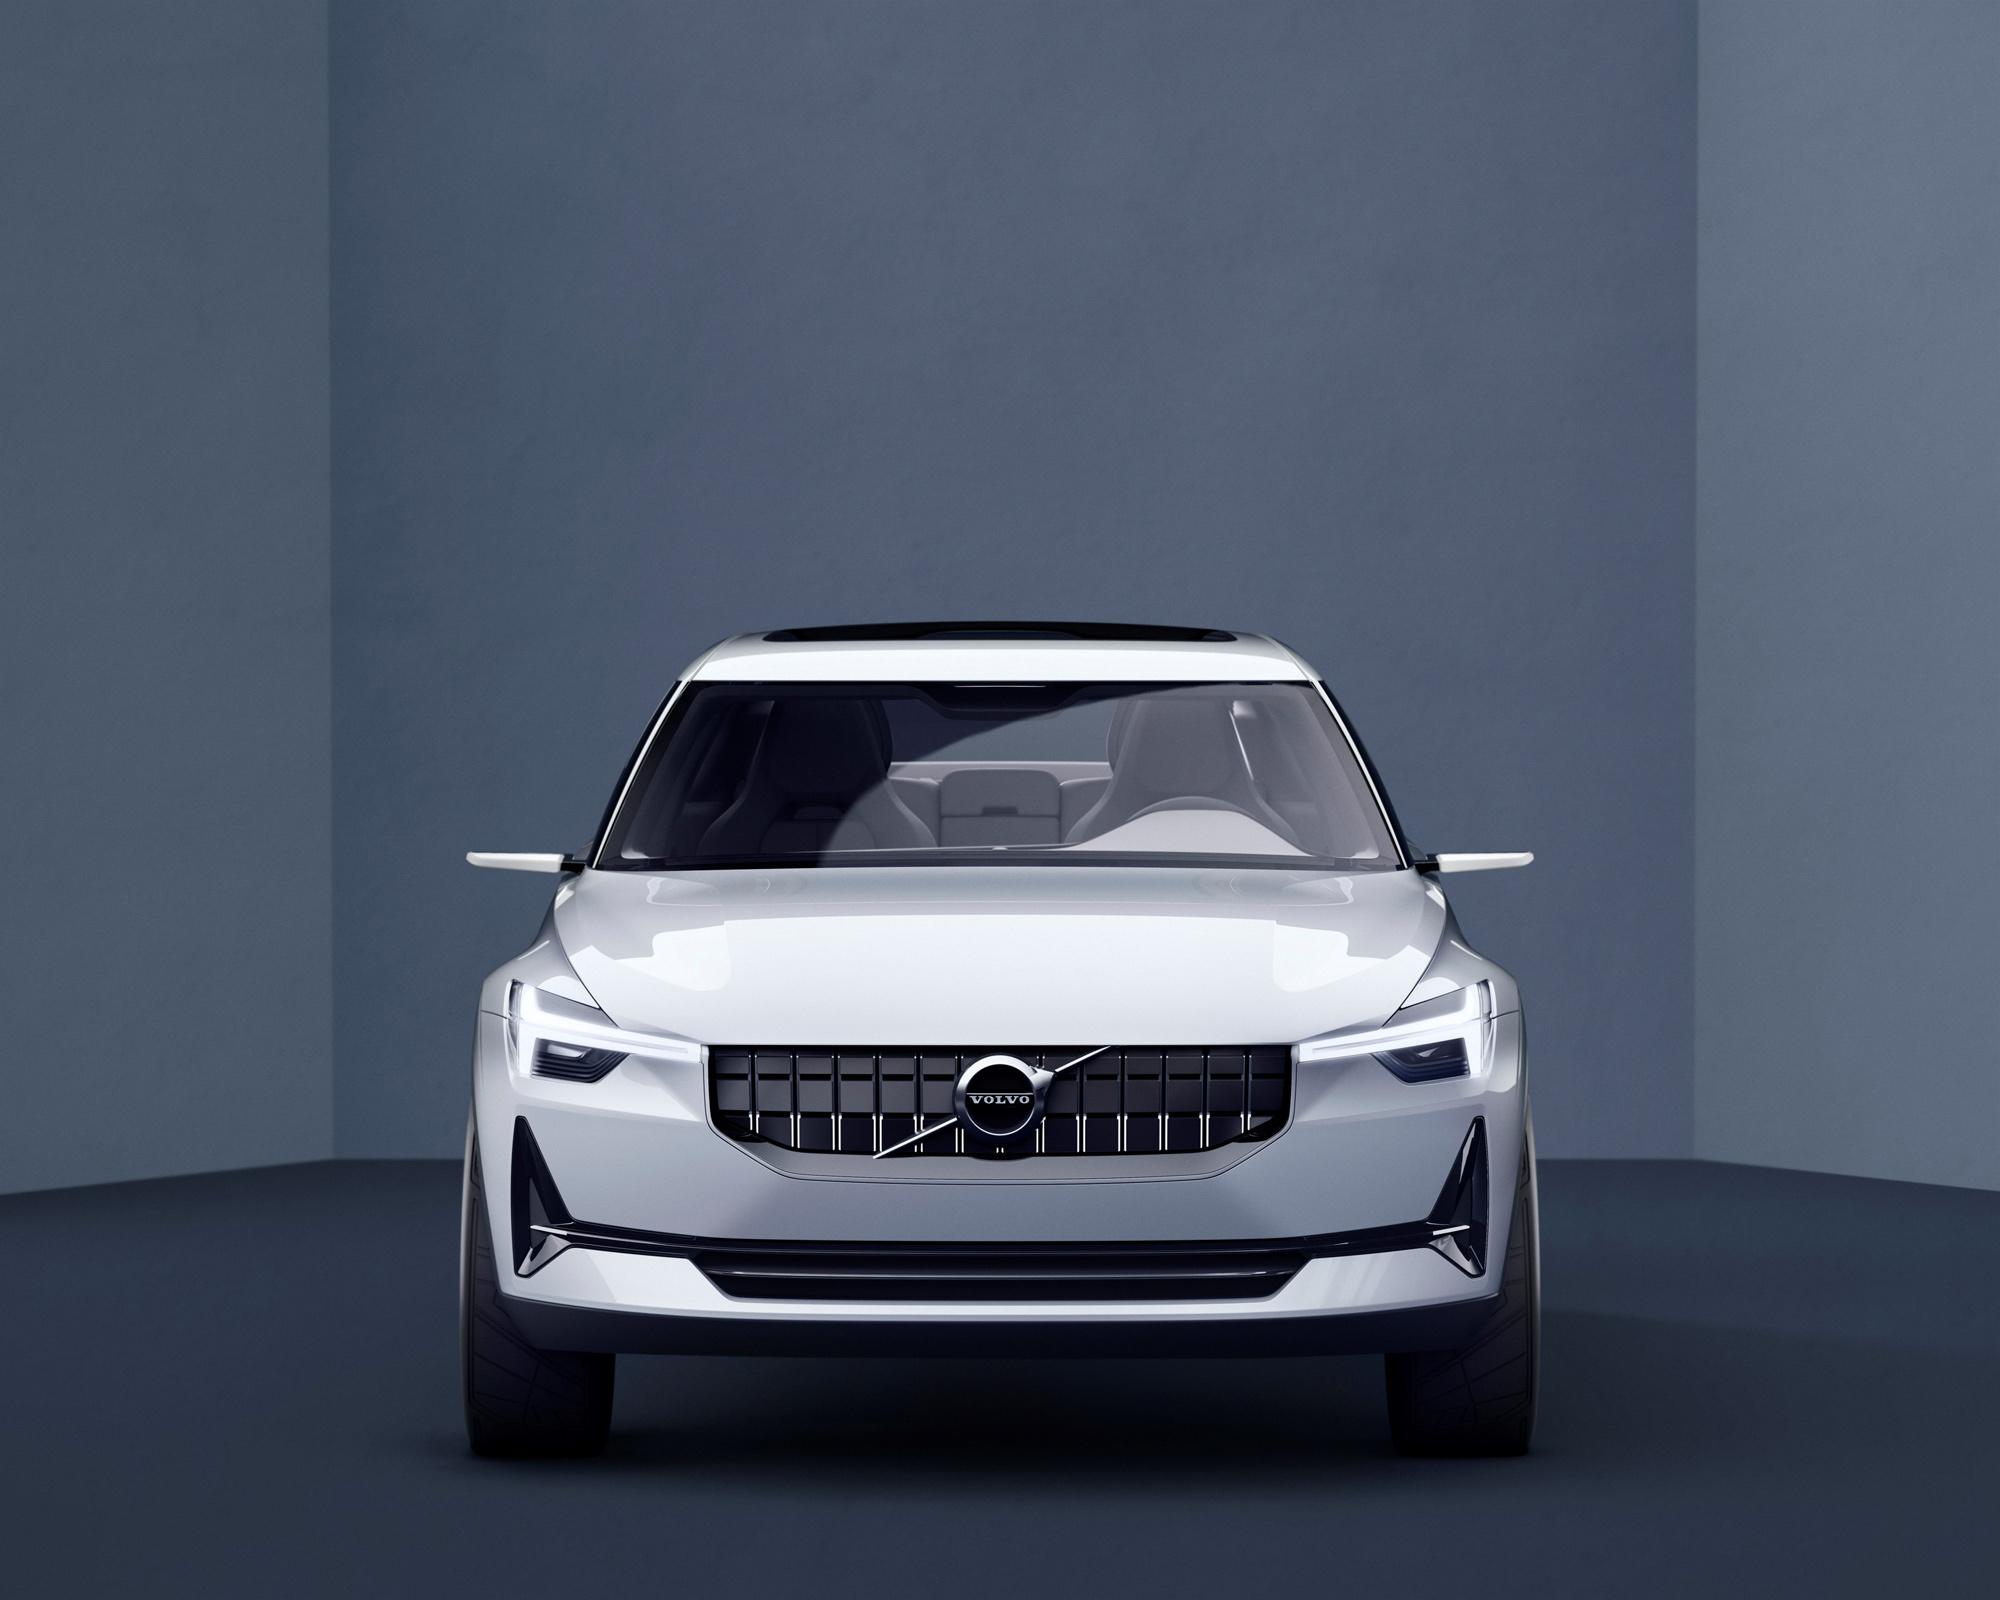 Volvo XC40 Wallpaper Image Photo Picture Background